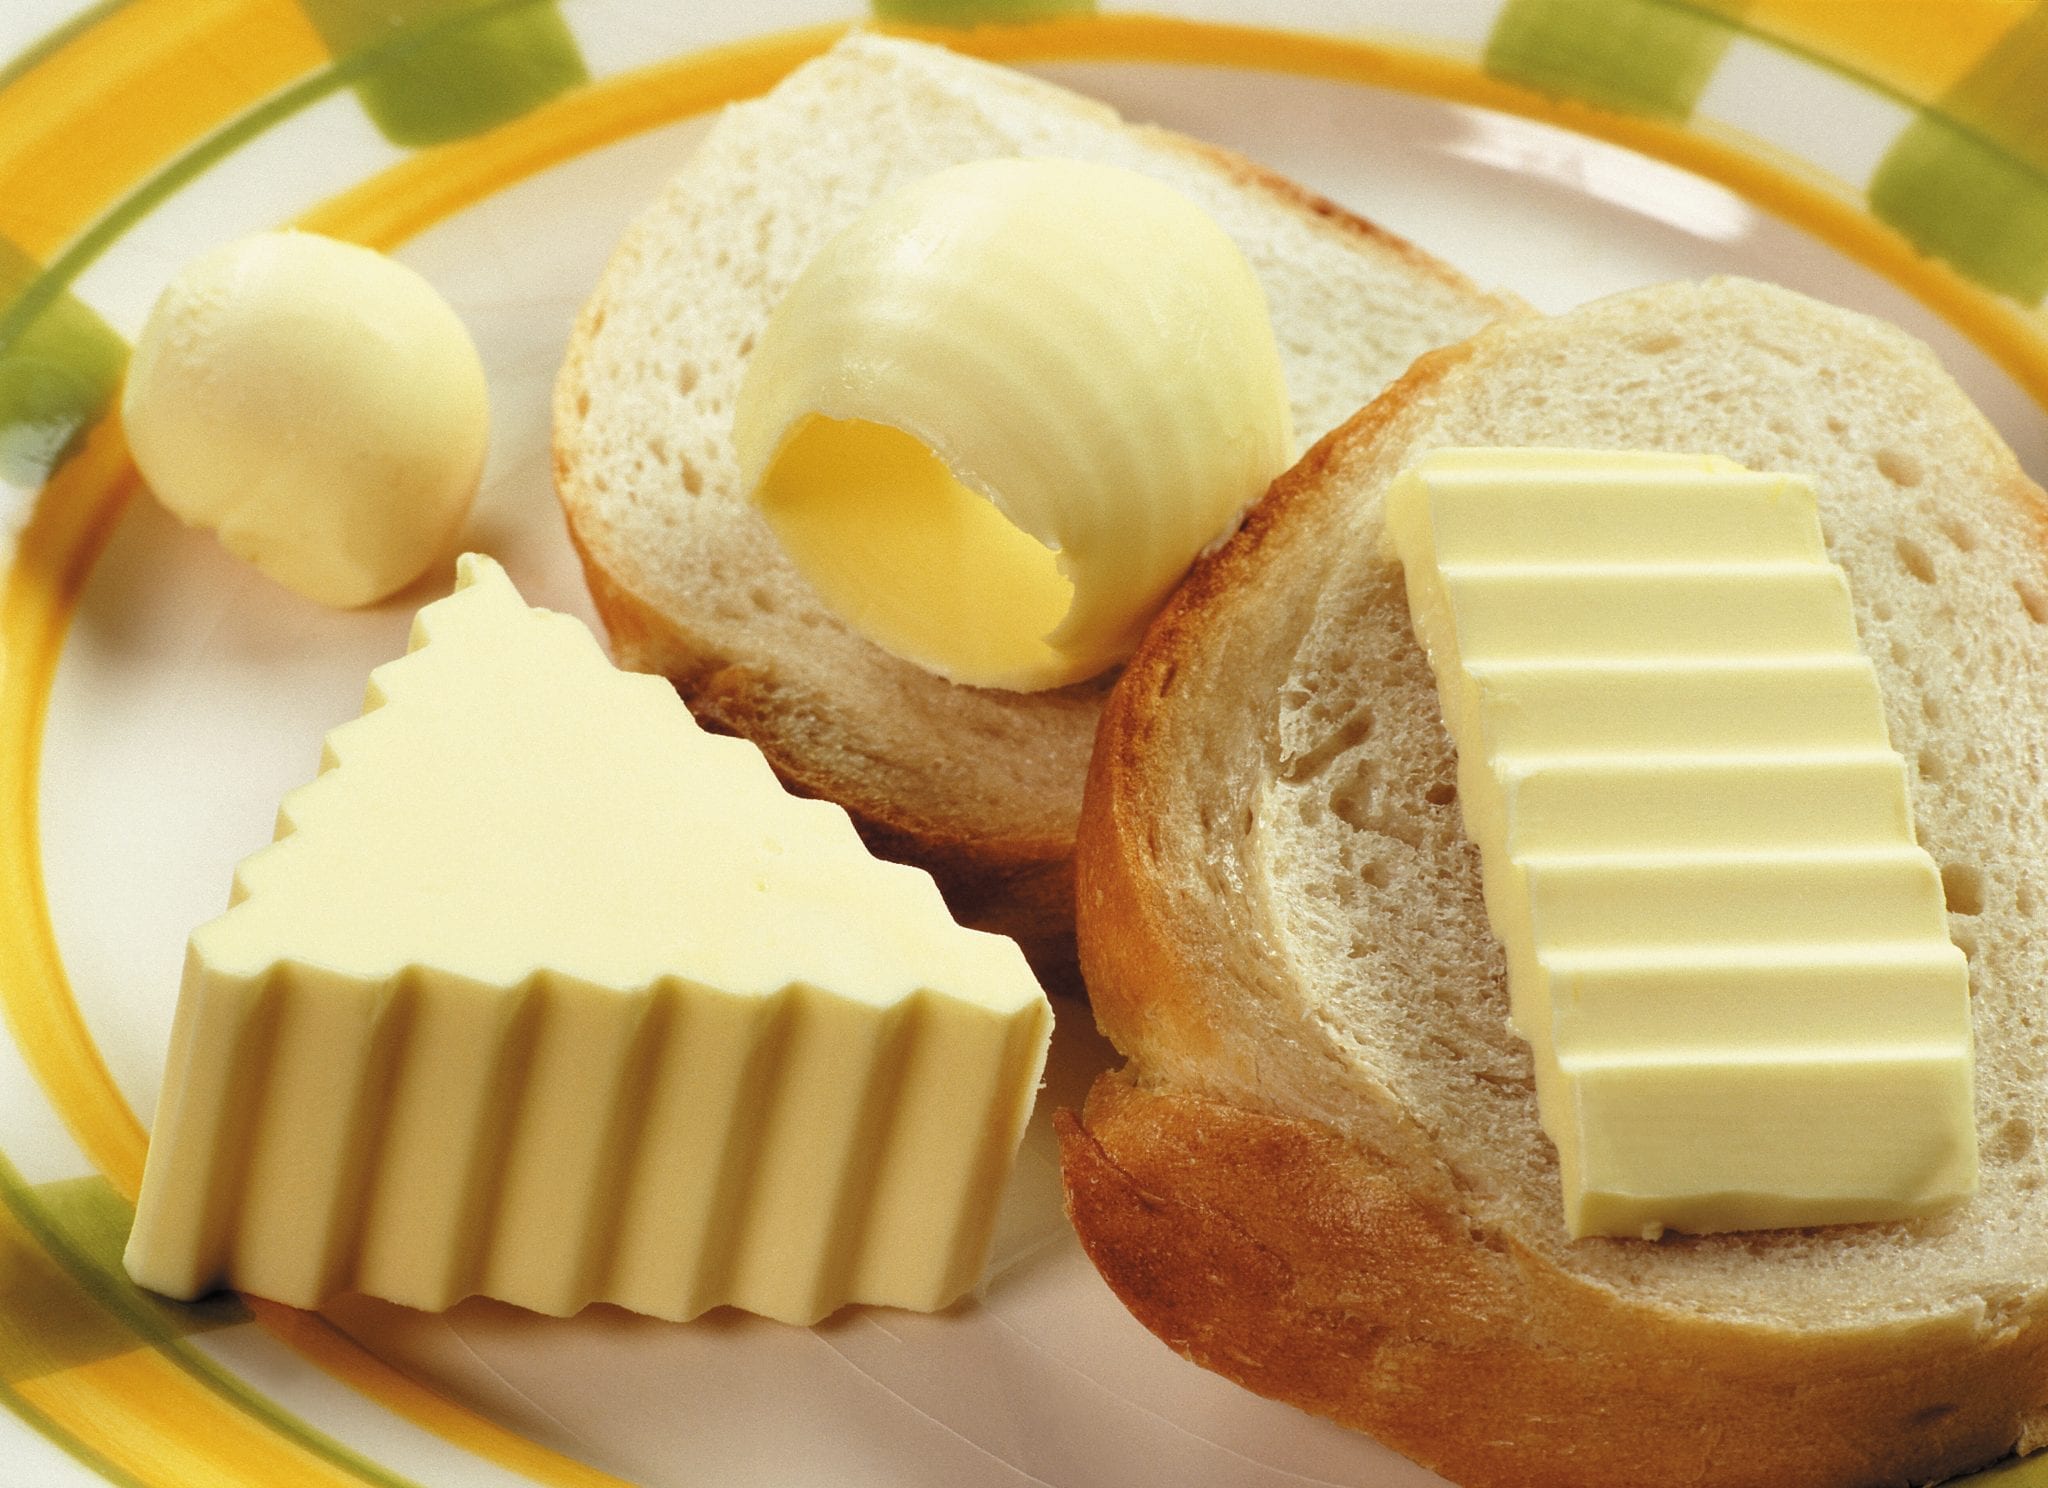 Butter Blends, Alternatives, Margarines, and Spreads